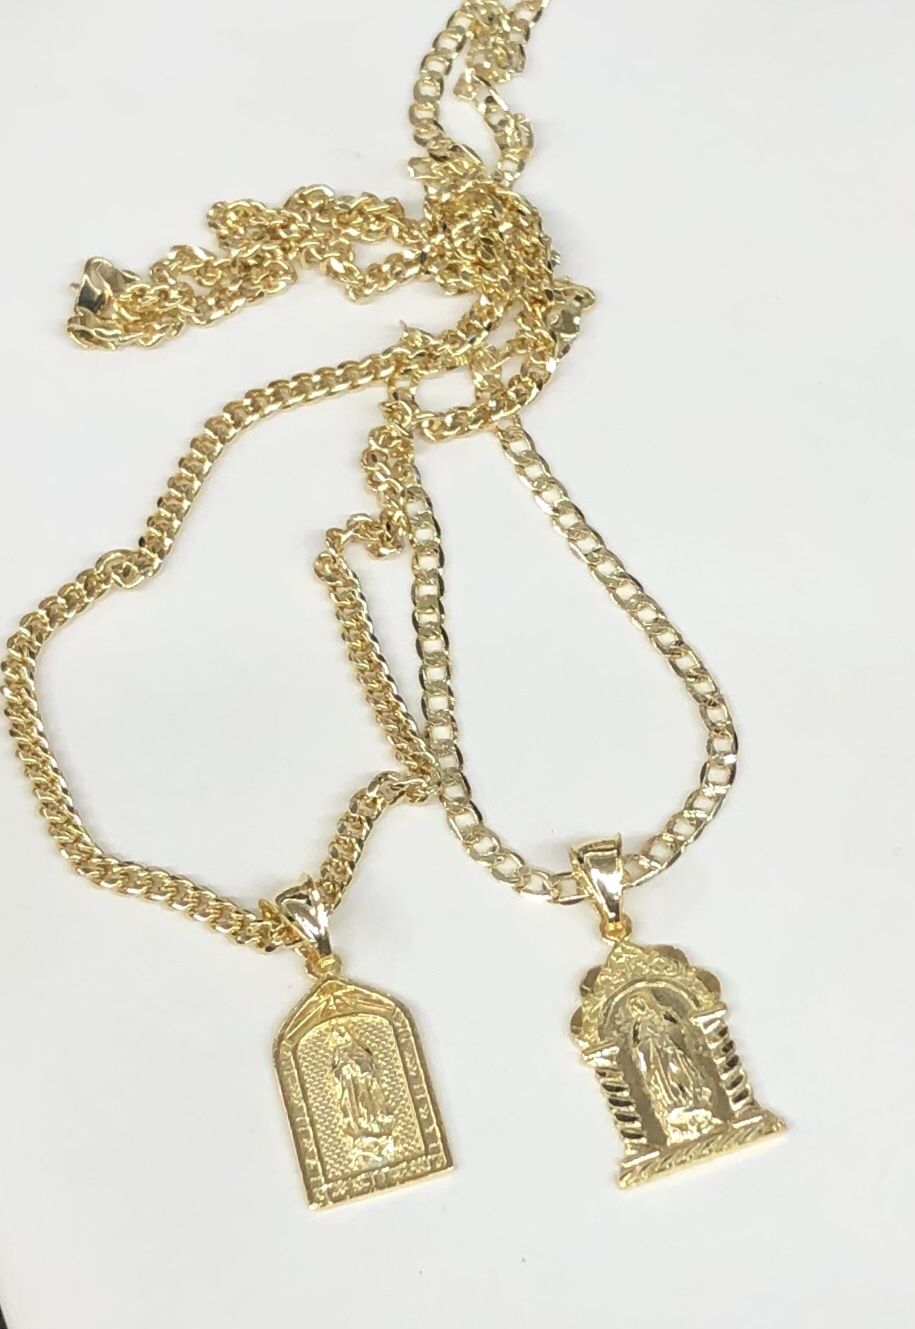 14k gold bonded known as gold filled diamond cut Cuban necklace and virgin Mary pendant available in 20”24” long best quality guarantee!!! 💯👍💯 For 